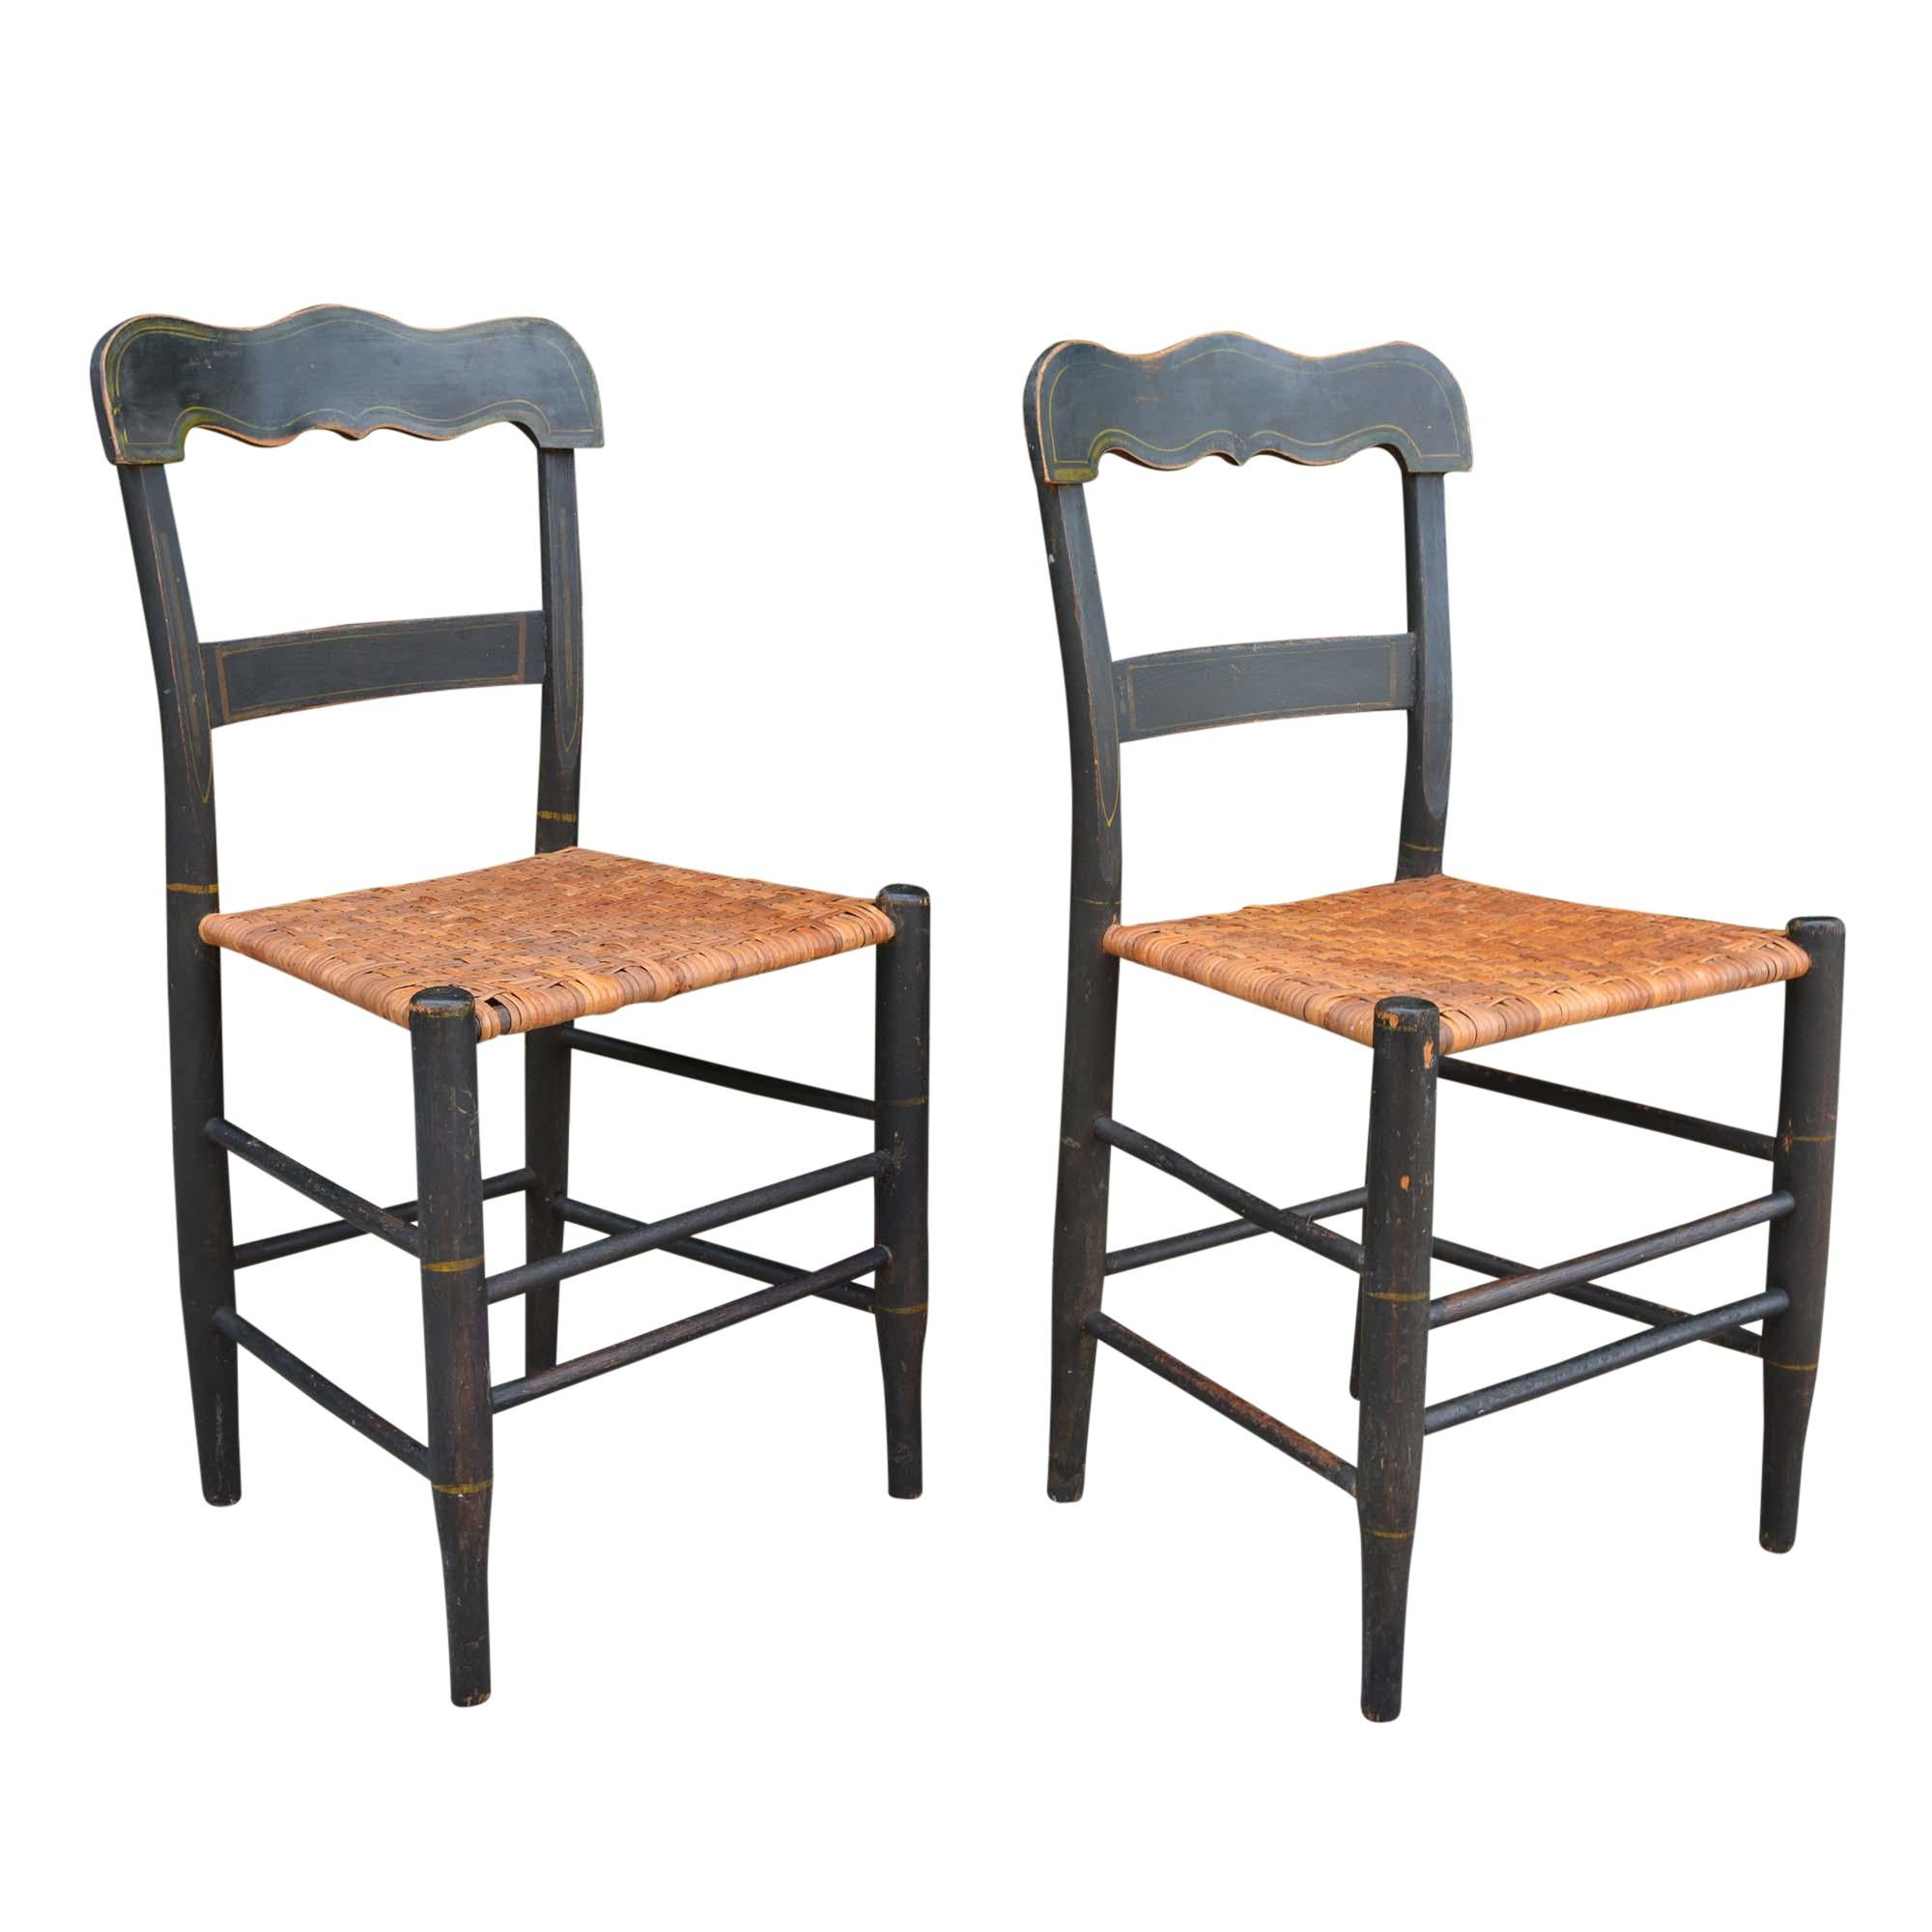 Antique American Country Sheraton Cane Seat Chairs Pair For Sale 3